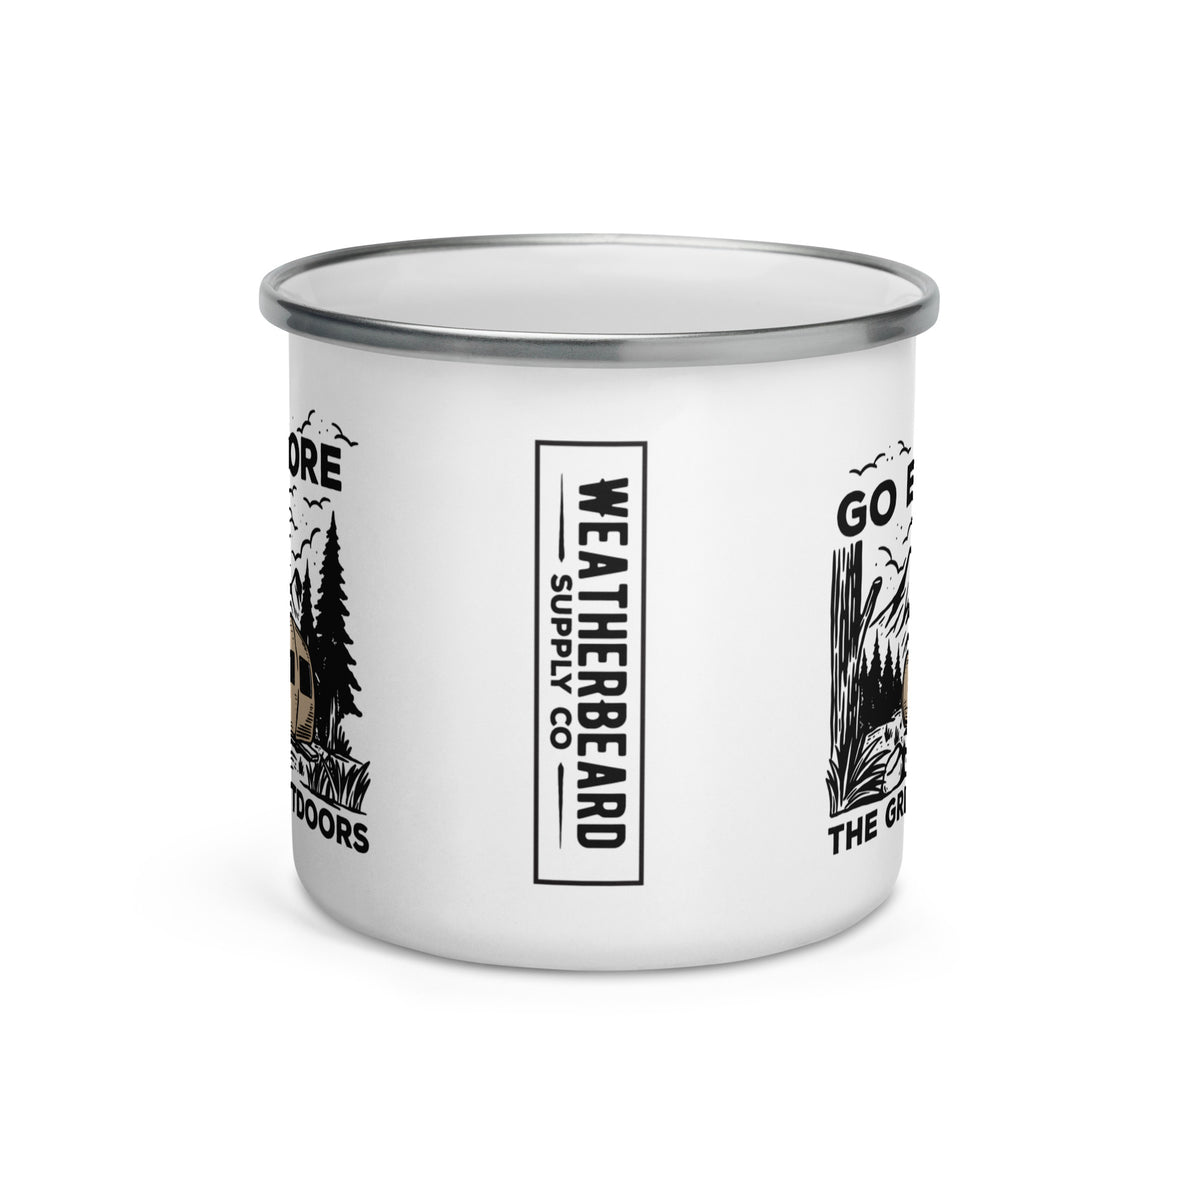 Camper In The Mountains Travel Mug